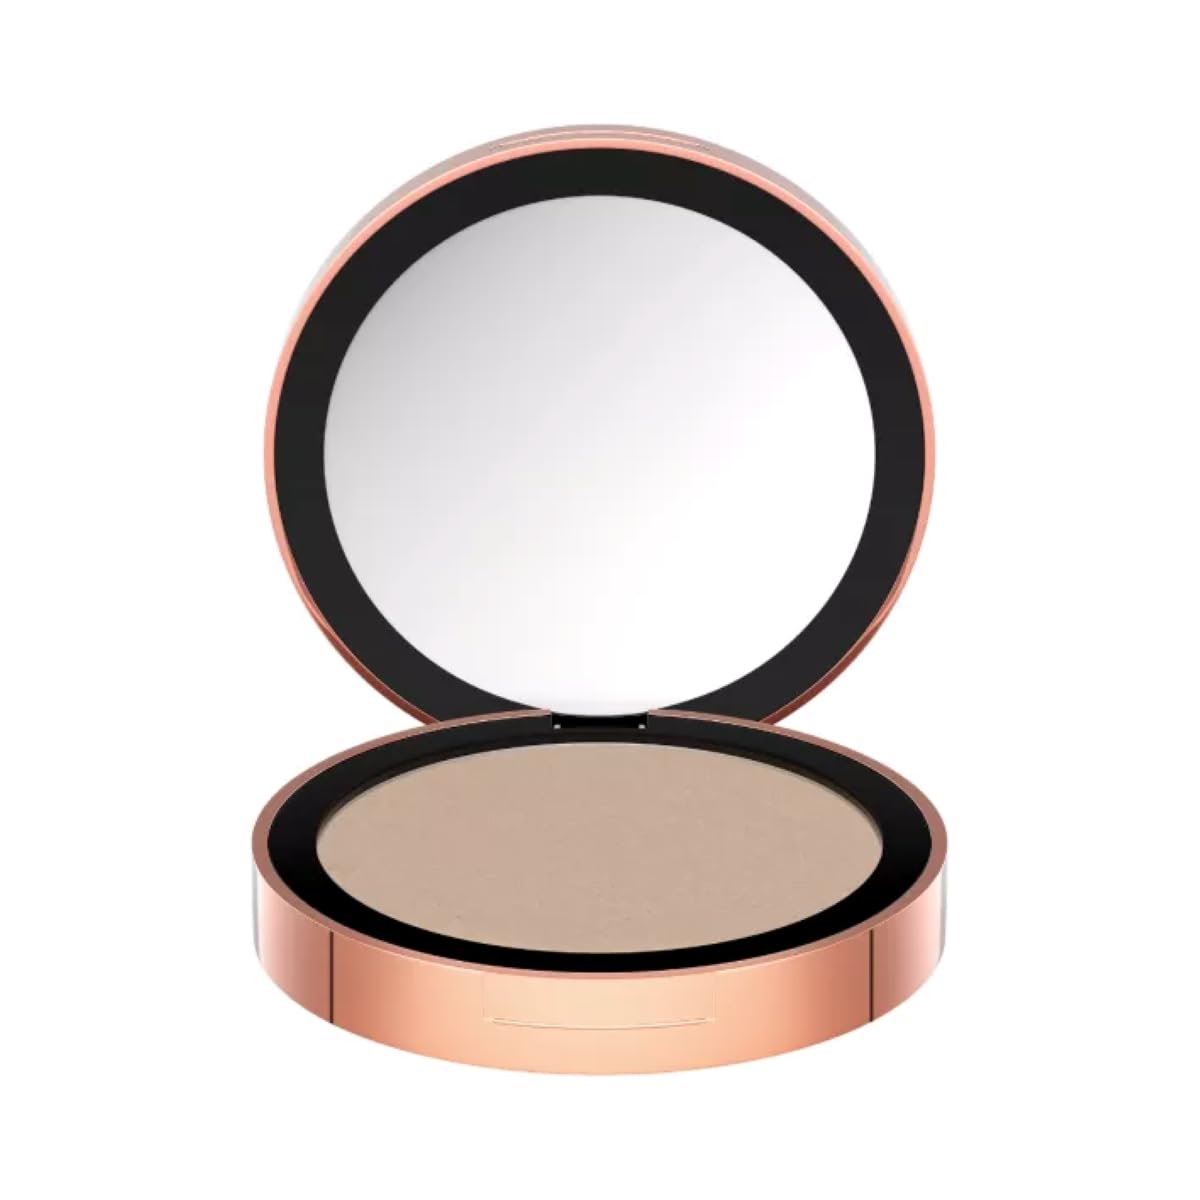 M. Asam Magic Finish Satin Compact Powder Ivory (8 g) - Pressed Powder for Perfect Hold, Matted & Perfection, Extends the Hold of Make -Up, with Hyaluronic Acid & Vitamin E